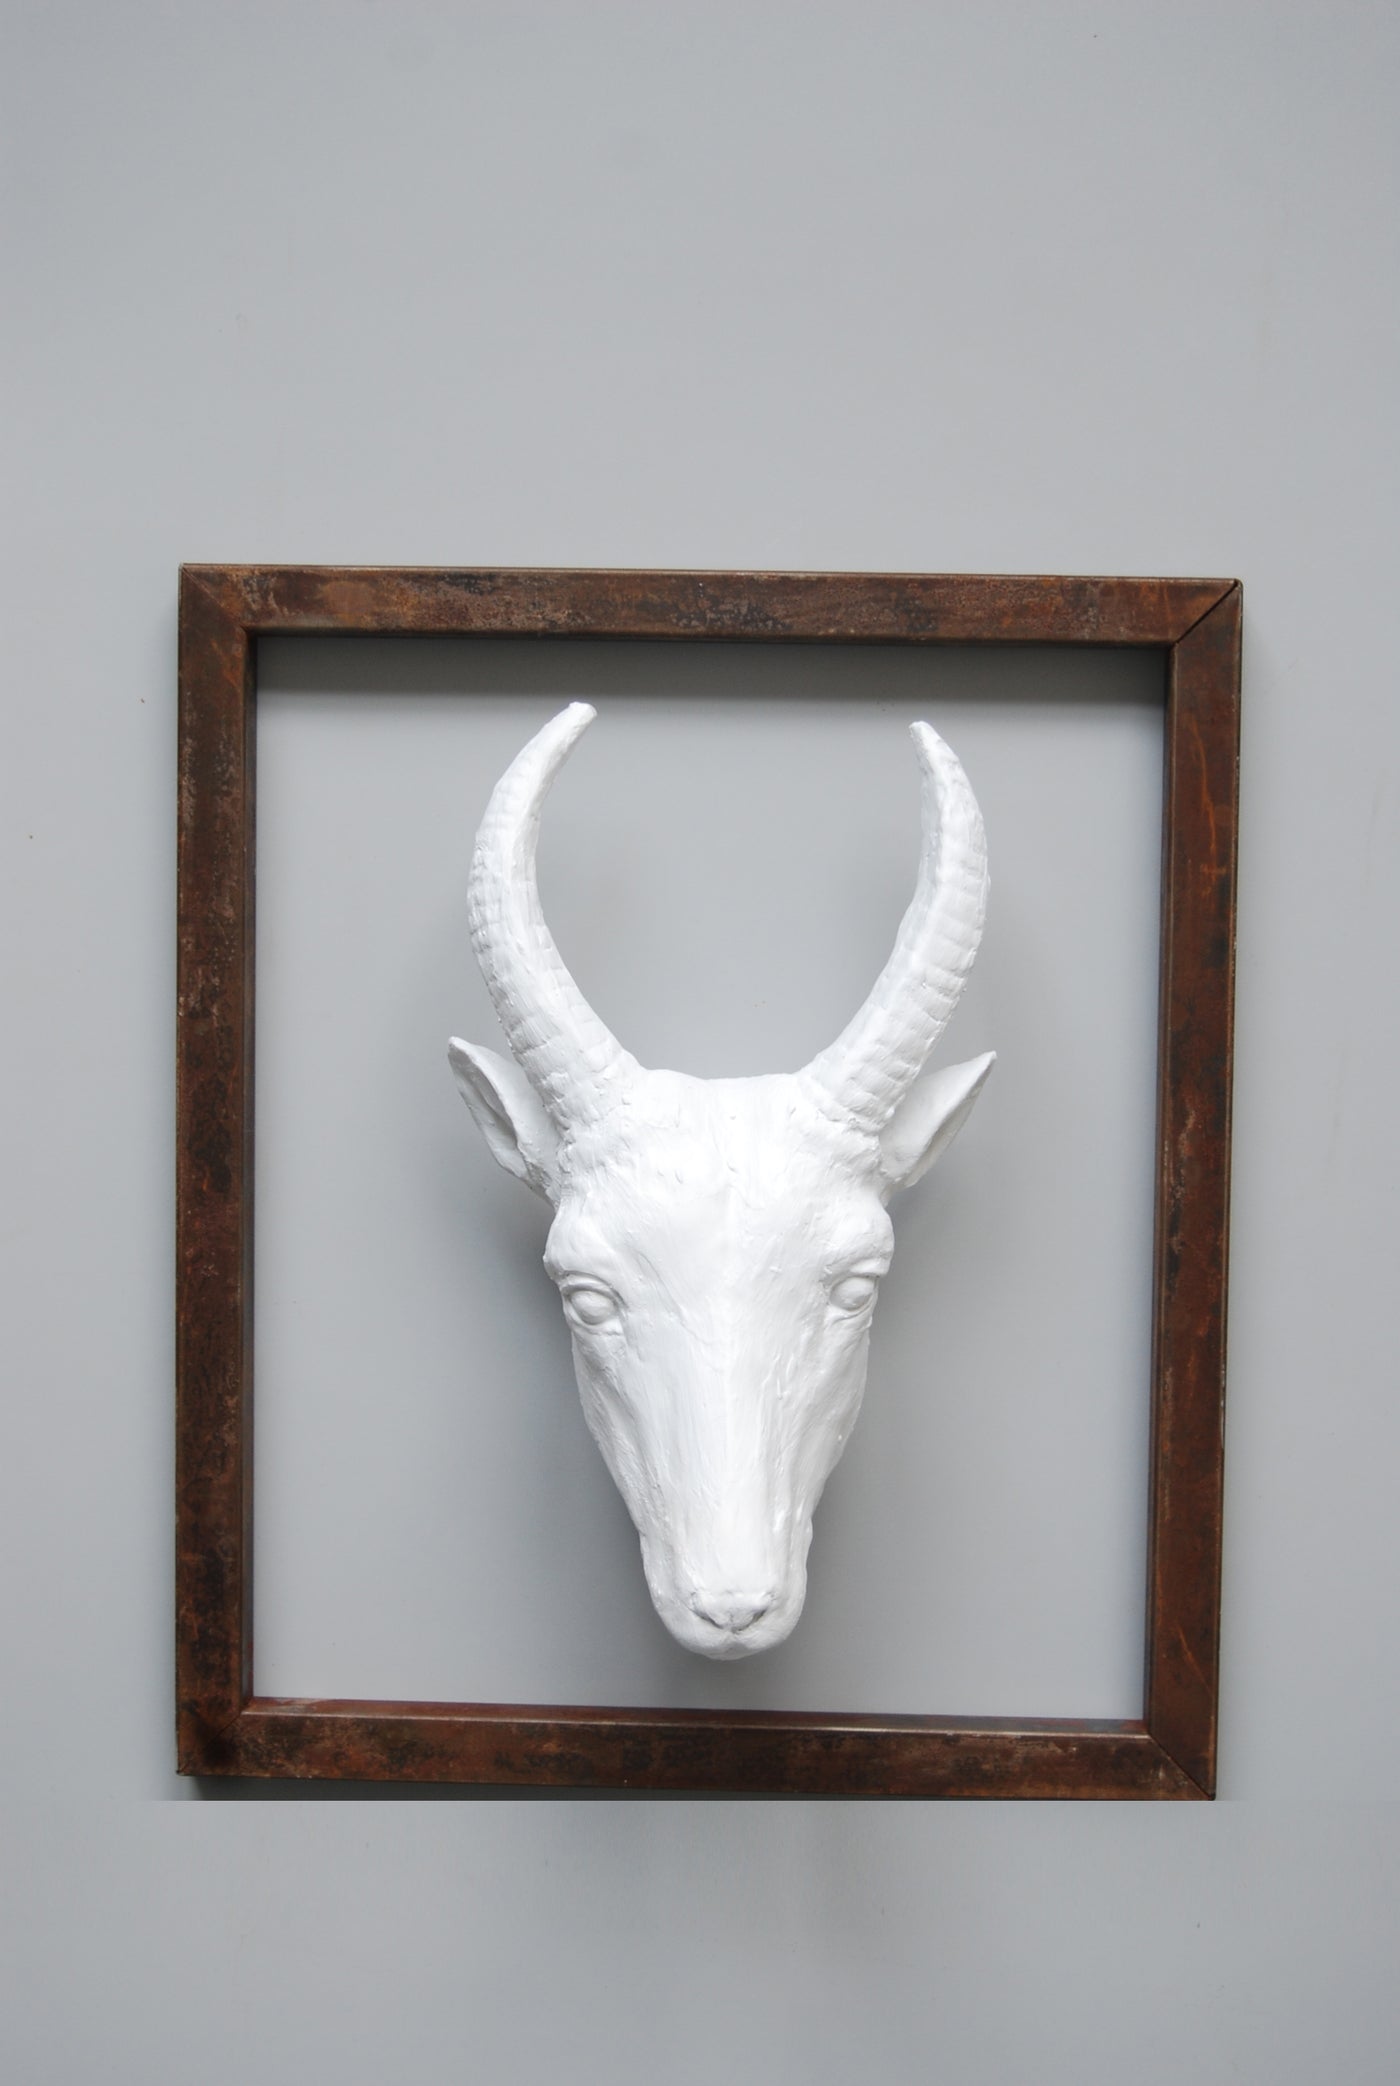 Metal frame with white Resin goat